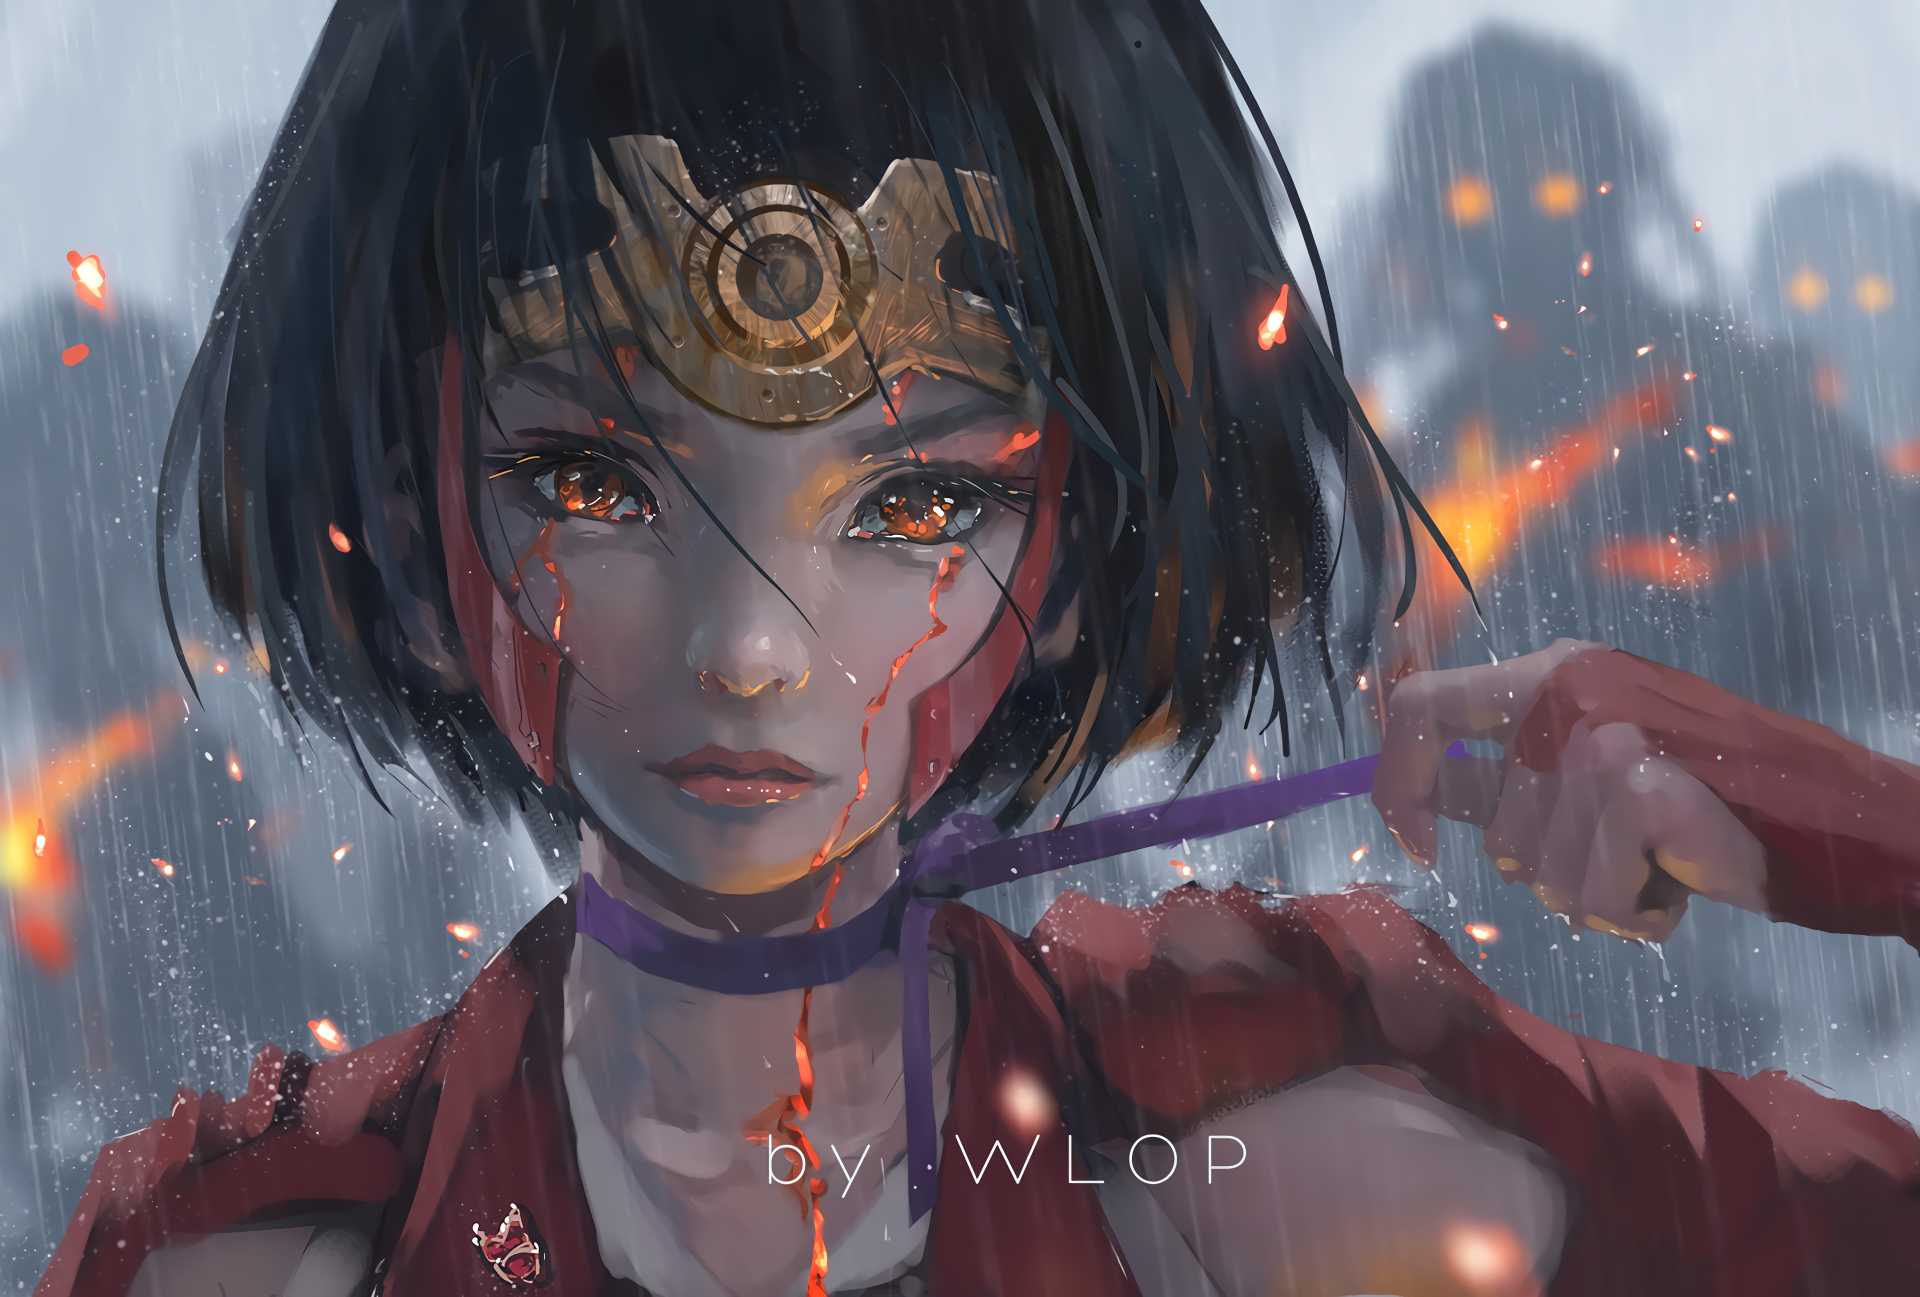 Kabaneri Of The Iron Fortress The Battle Of Unato Wallpapers